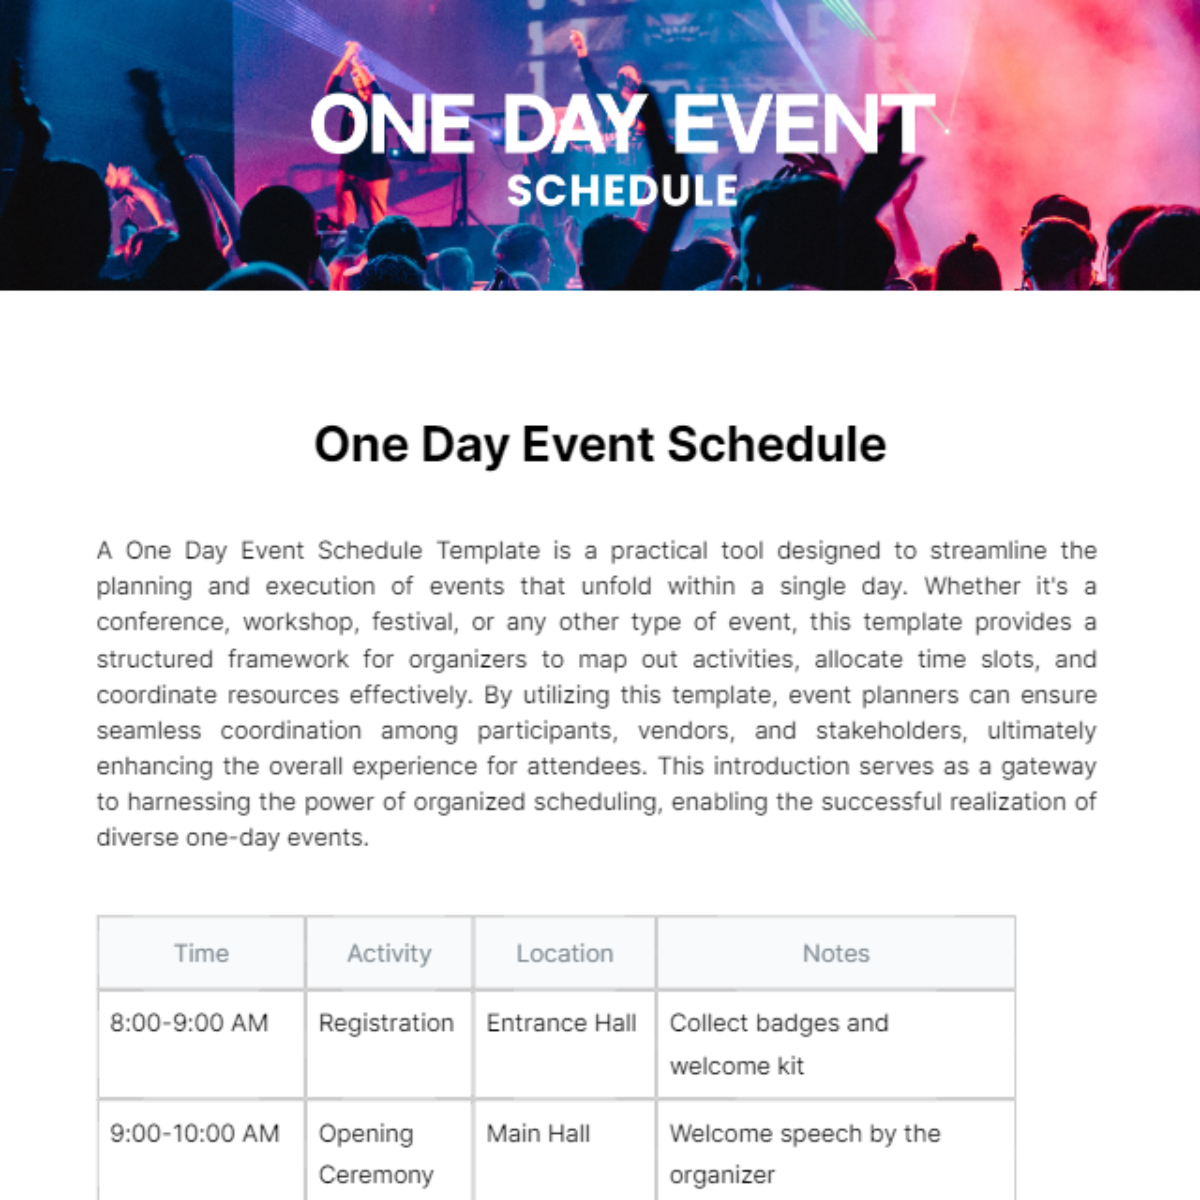 One Day Event Schedule Template